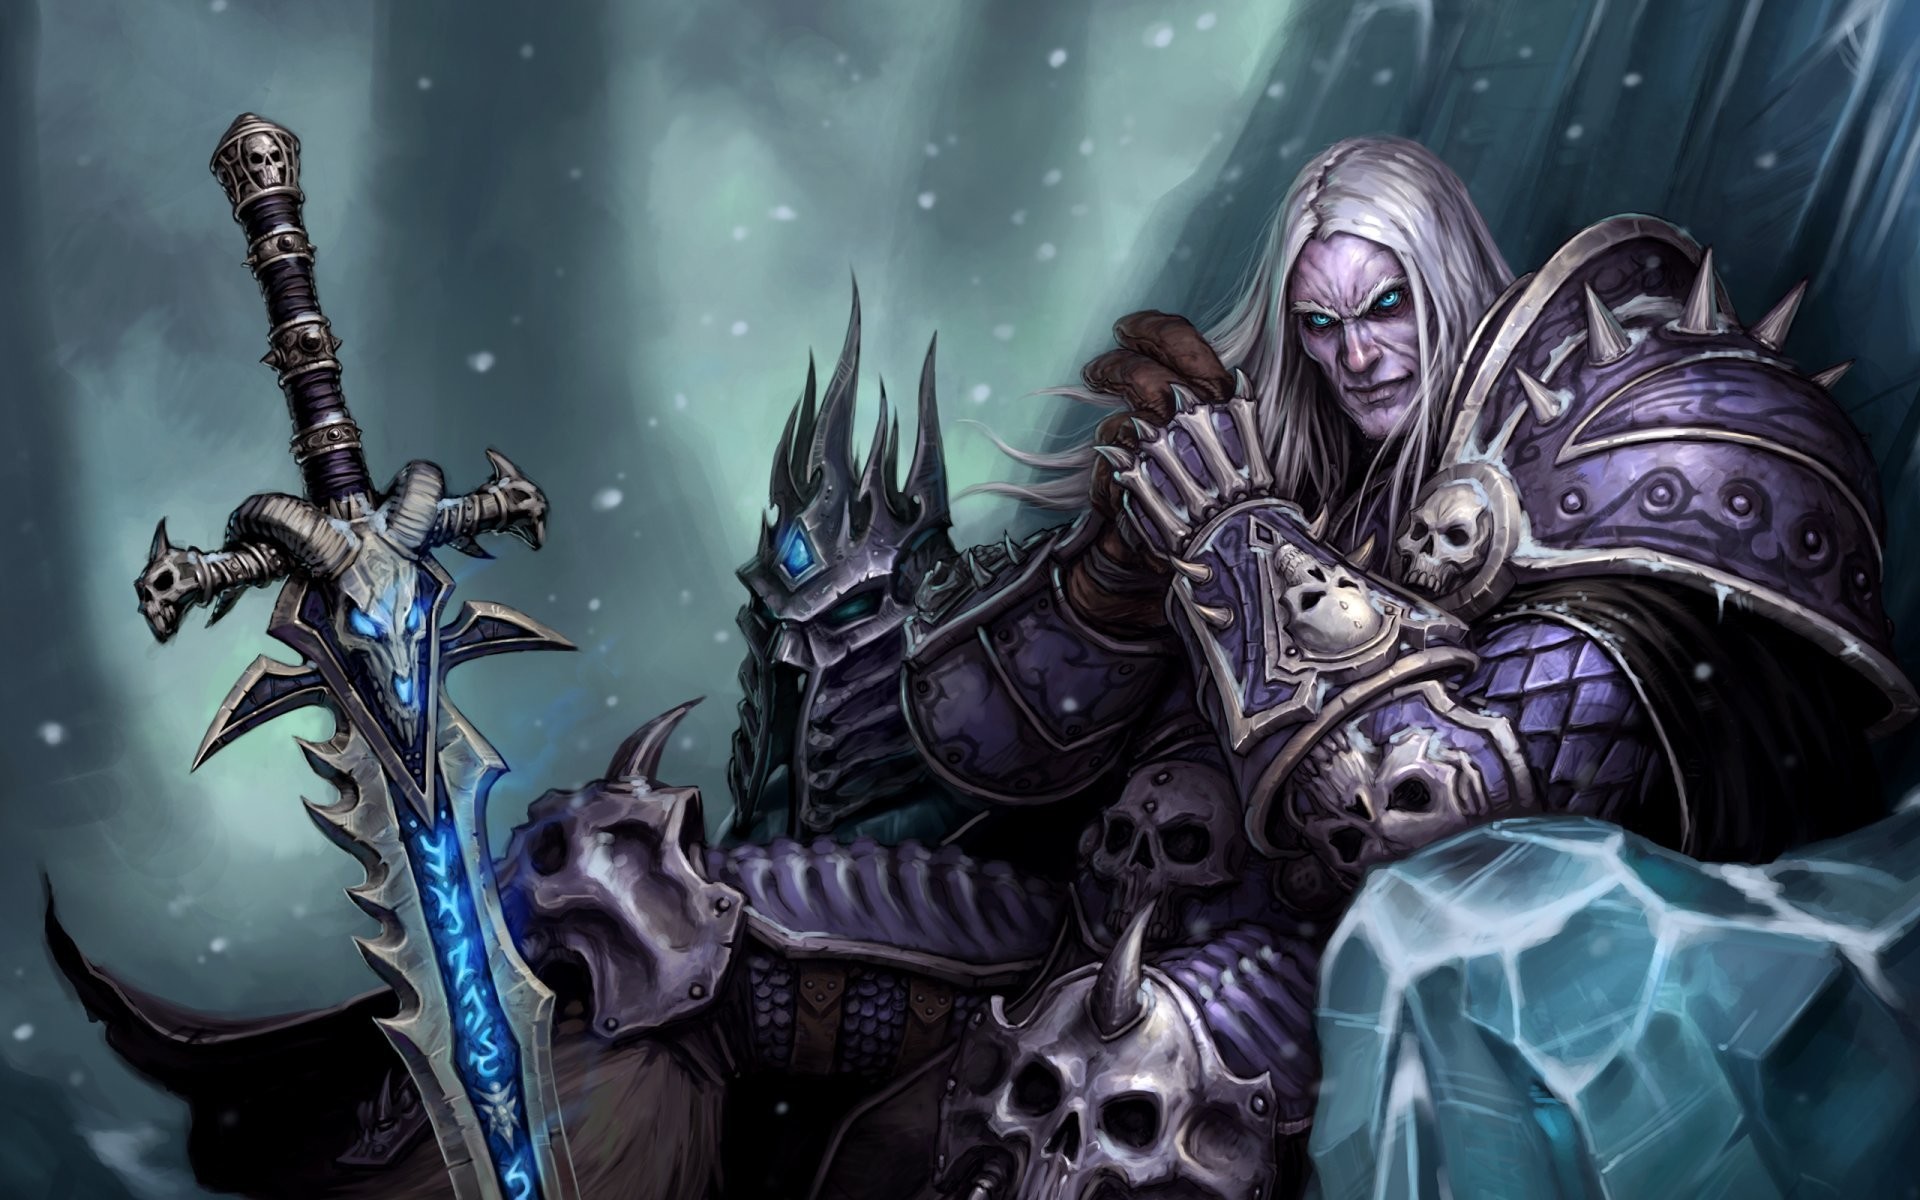 Arthas the lich king arthas menethil sword frostmourne sitting on a the frozen throne crown prince